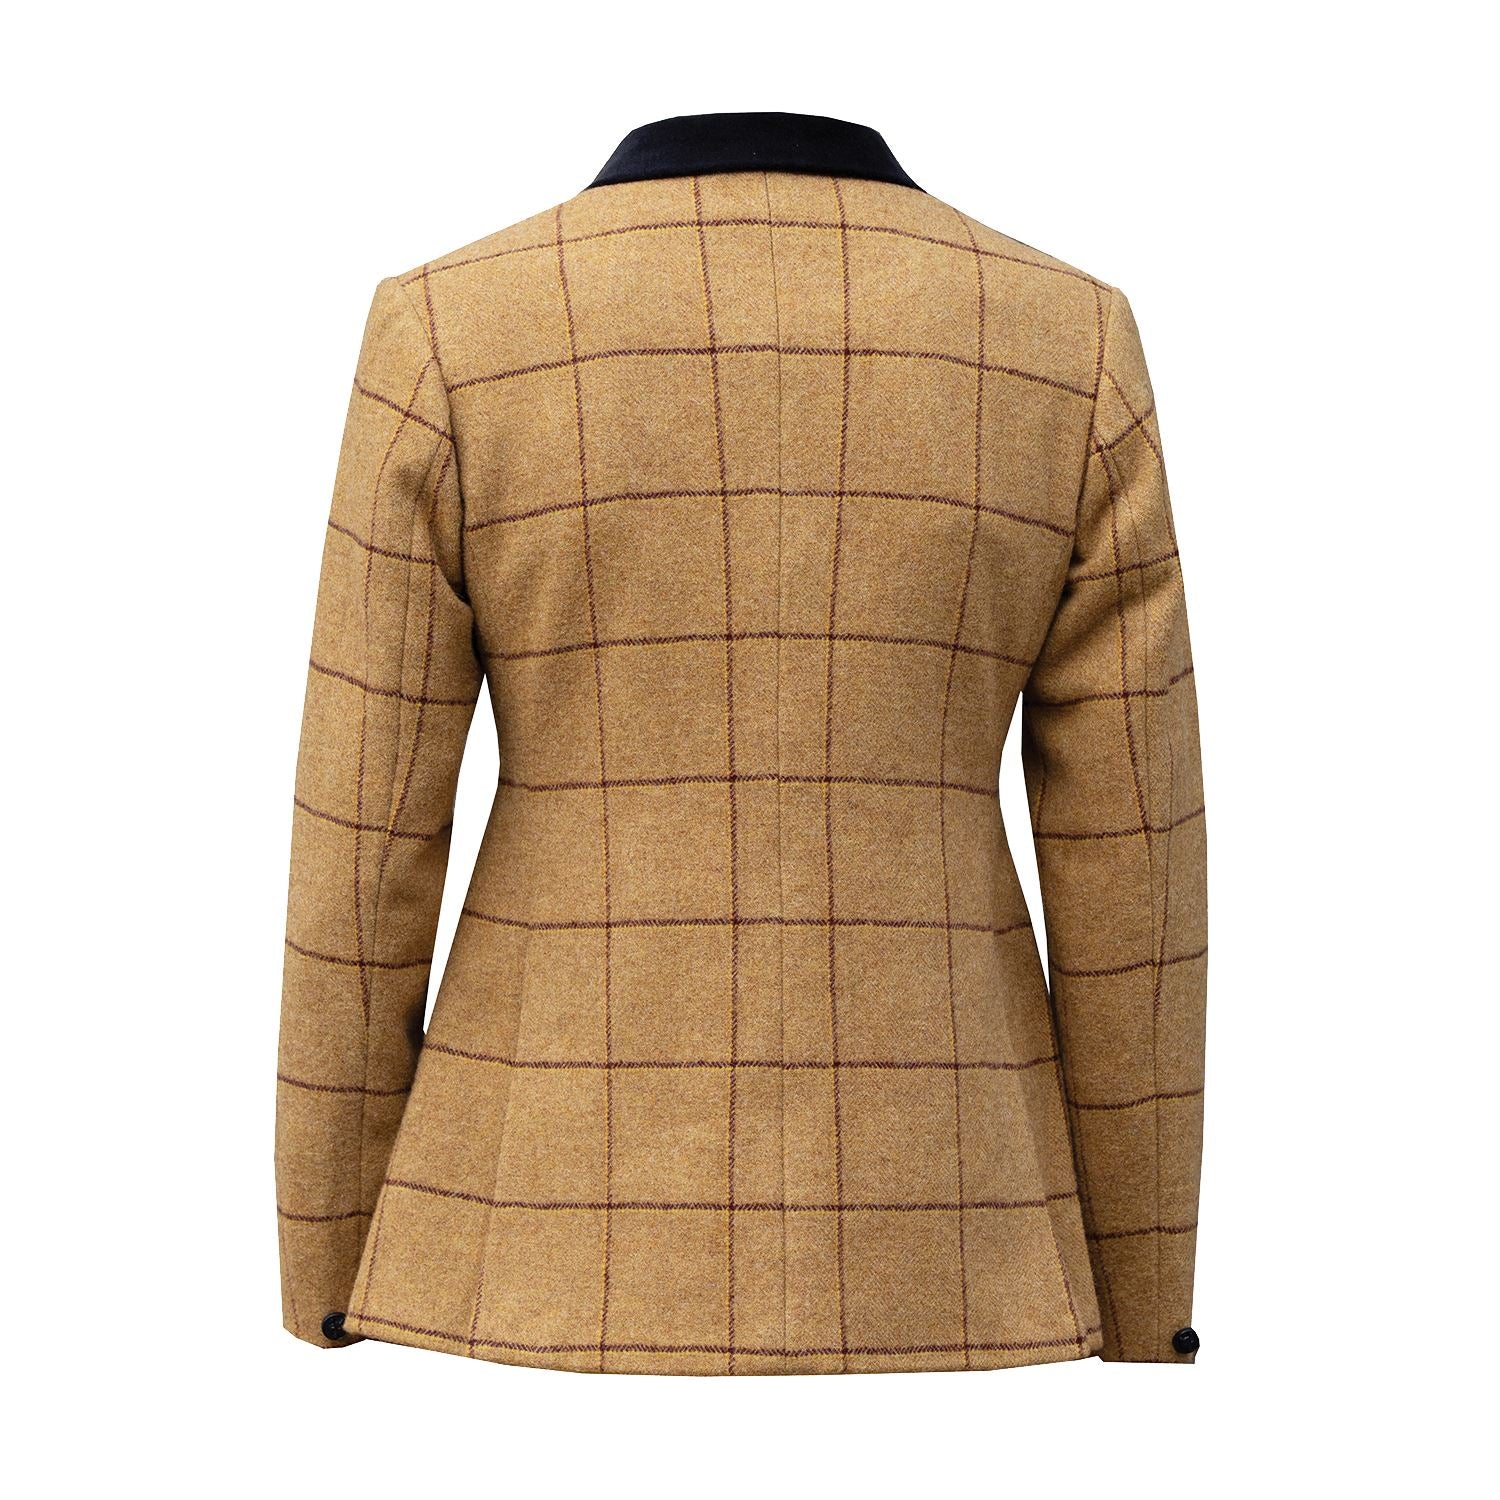 Equetech Childs Wheatley Deluxe Tweed Riding Jacket - Just Horse Riders